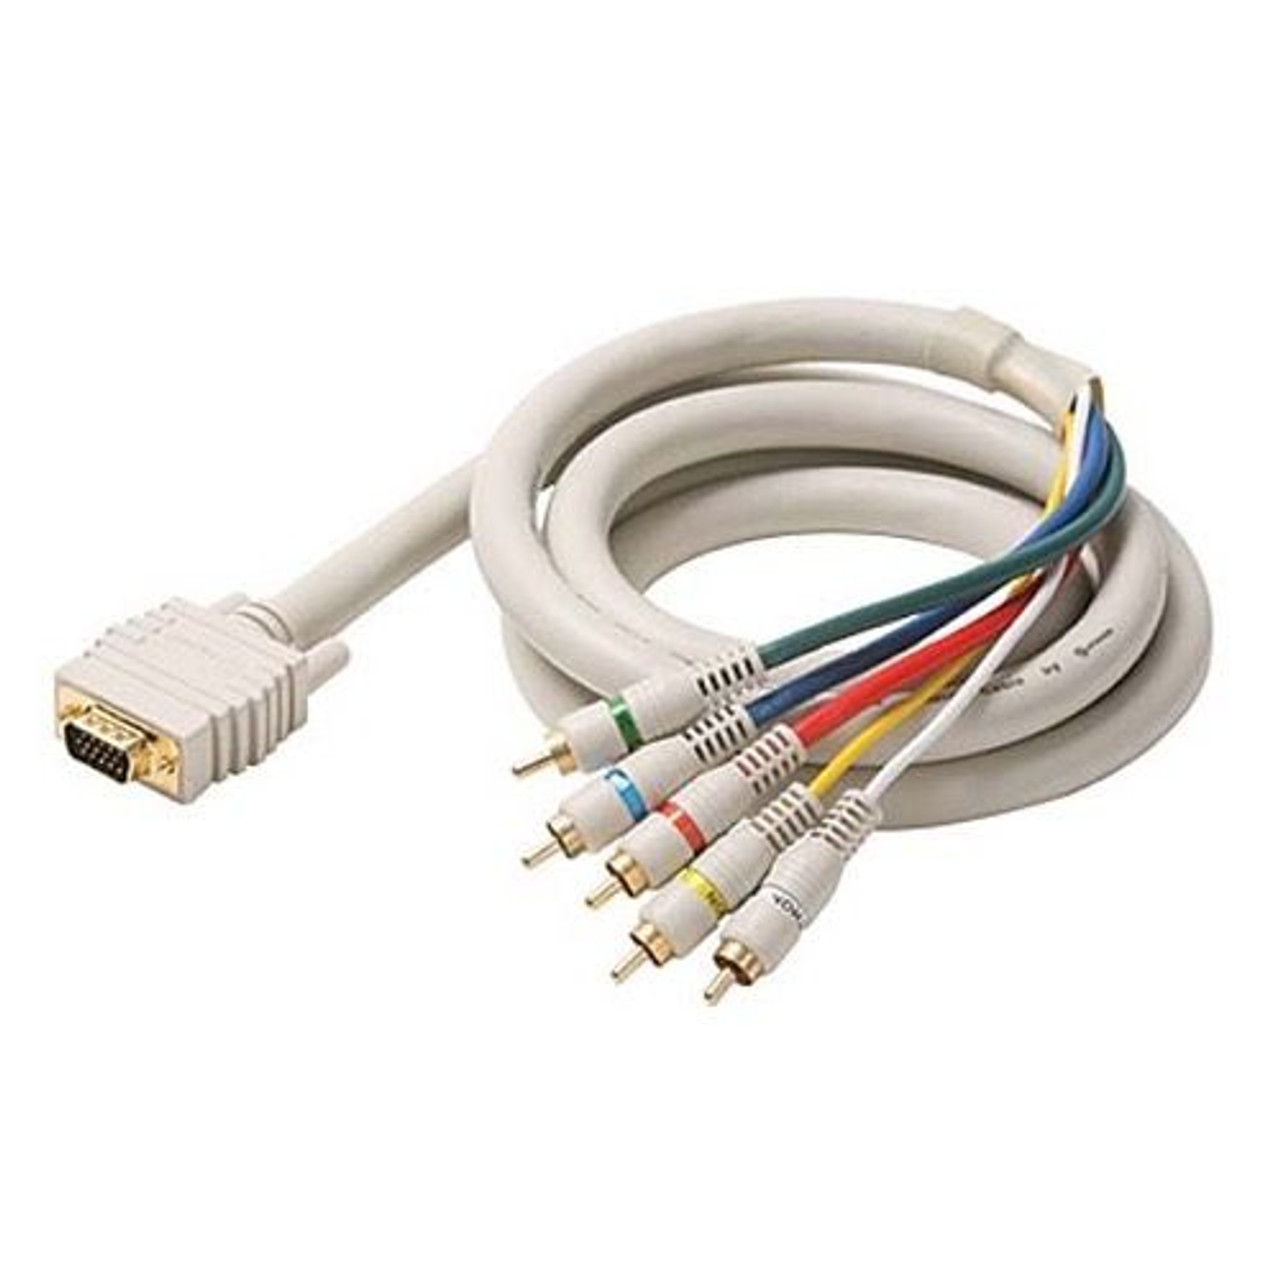 Steren 253-606IV 6' FT SVGA 5 RCA Male HD-15 Python HDTV Cable Component RGBYW Video Audio Cable Stereo 5-RCA Male to SVGA Ivory 24 K Gold Plate Color Coded Double Shielded Digital Signal Jumper, Part # 253606-IV